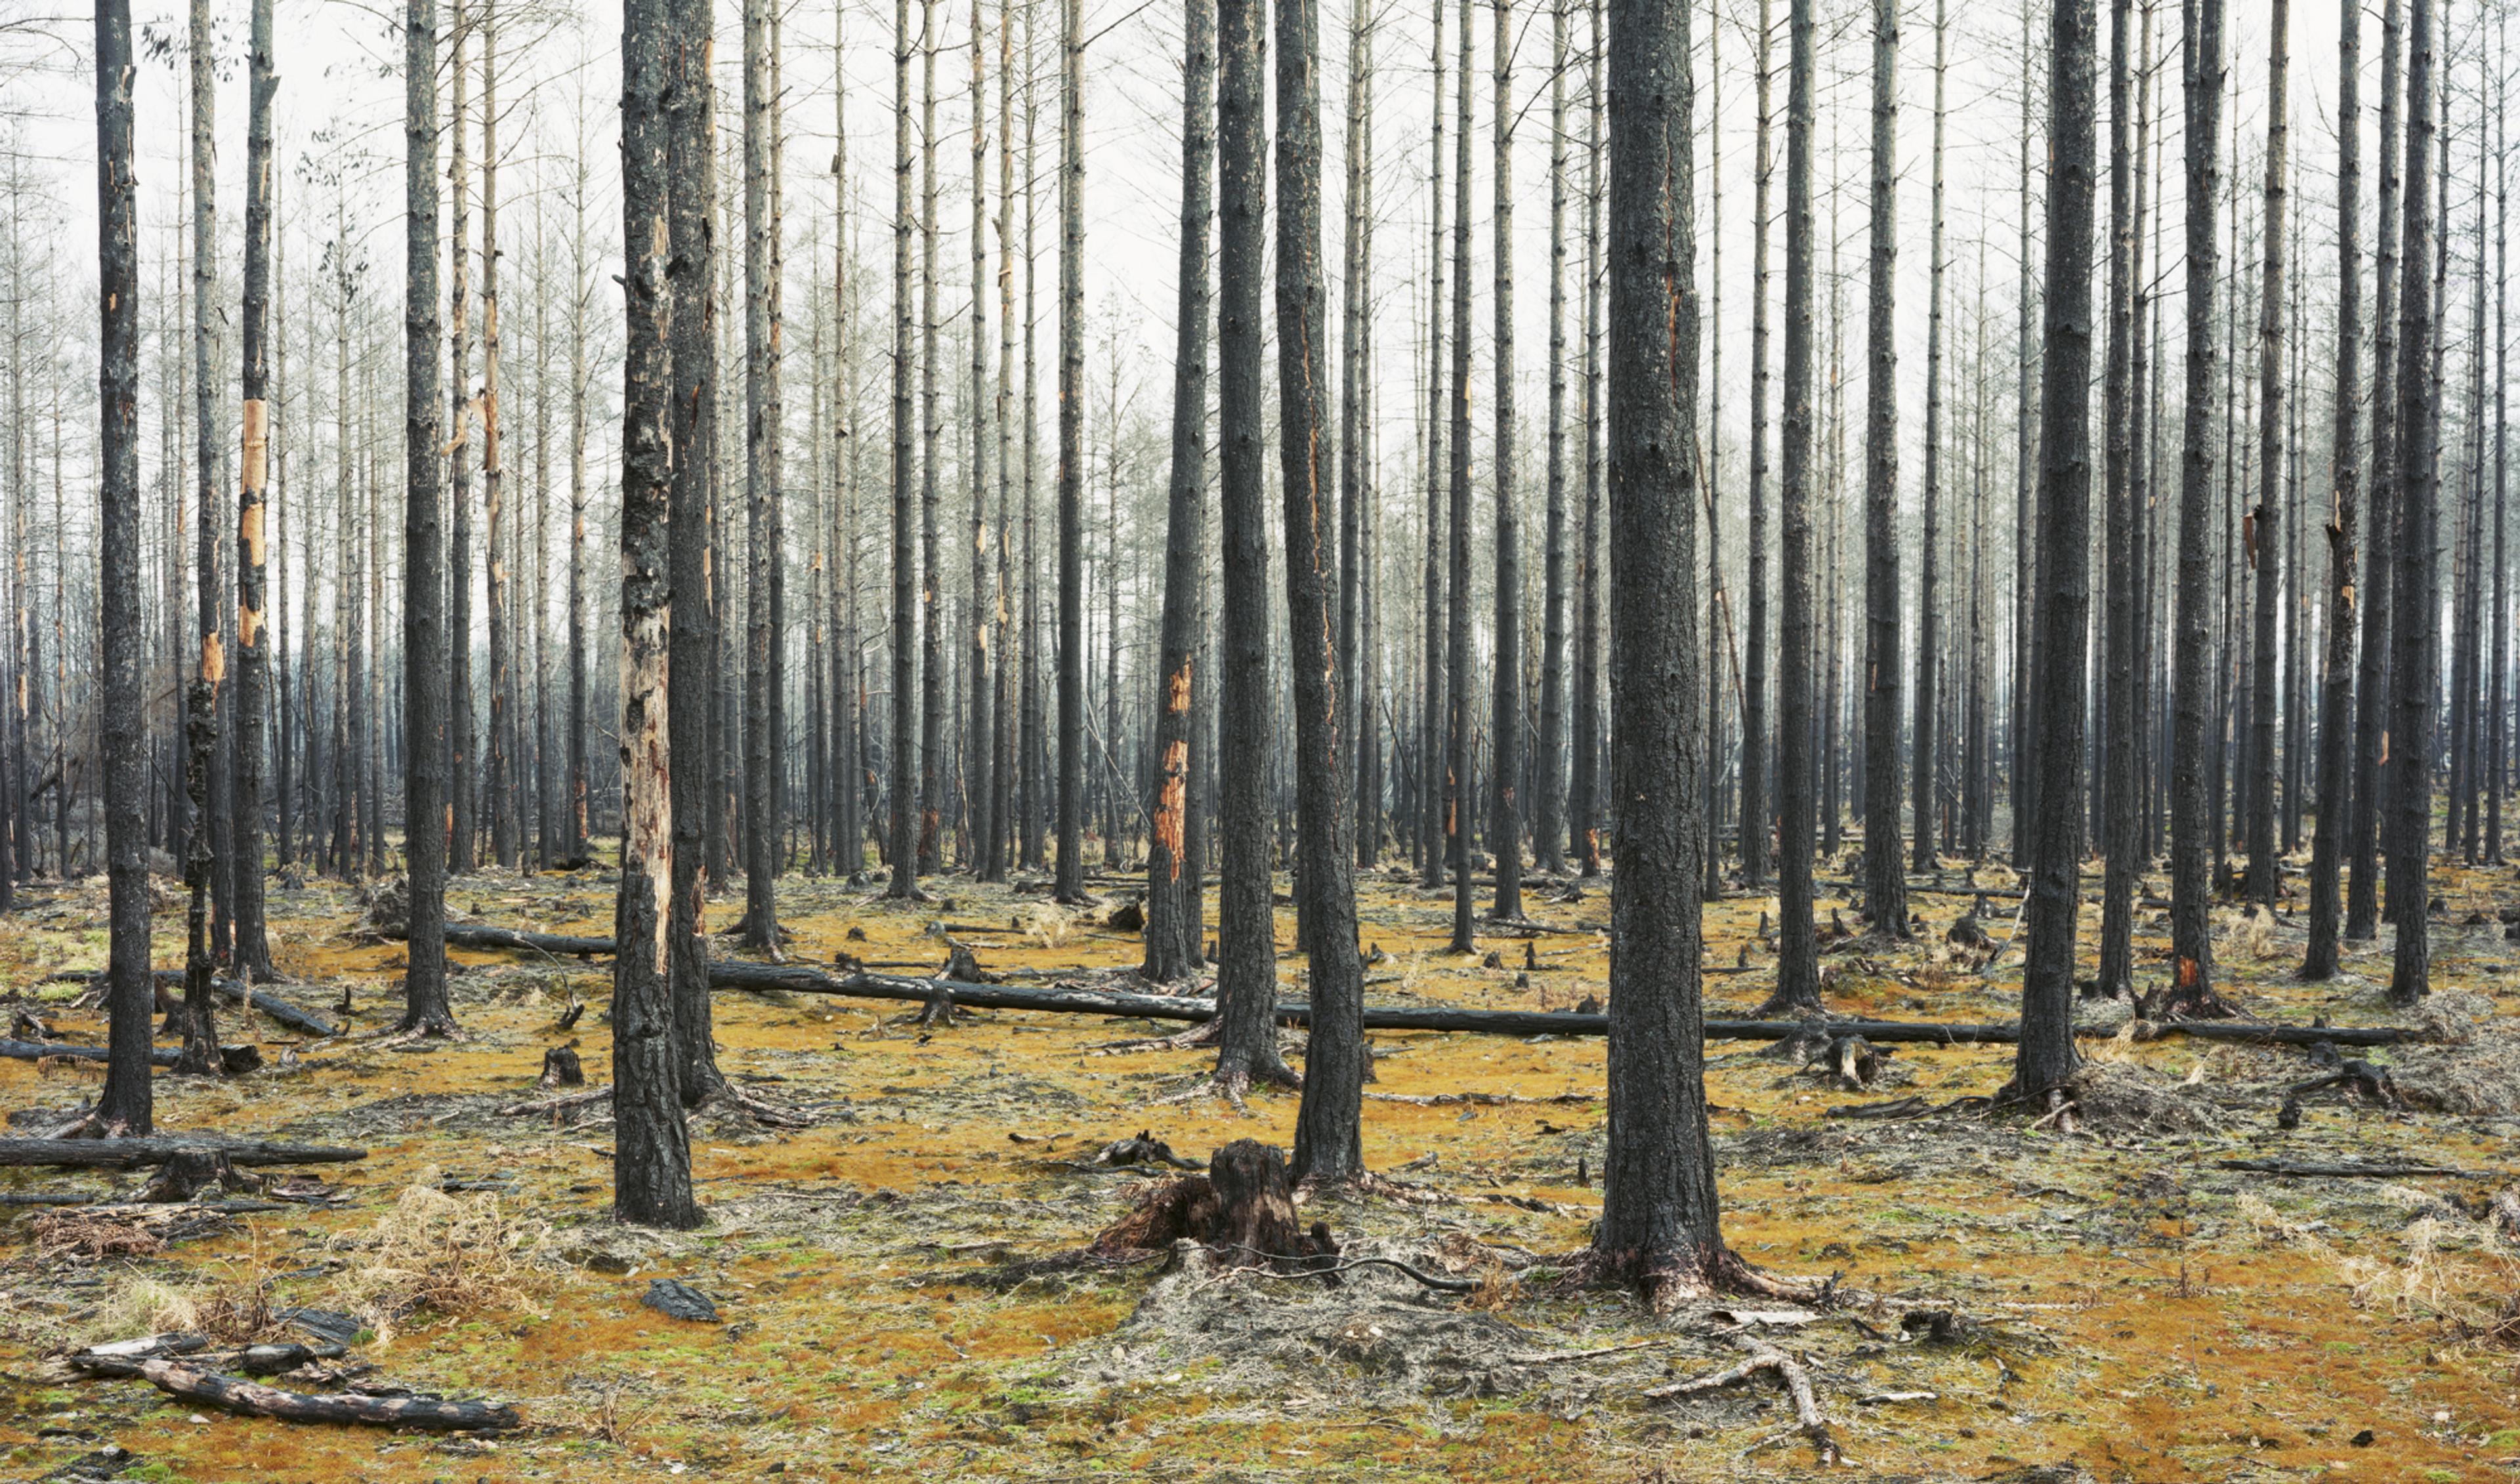 A photograph of a barren forest in autumn